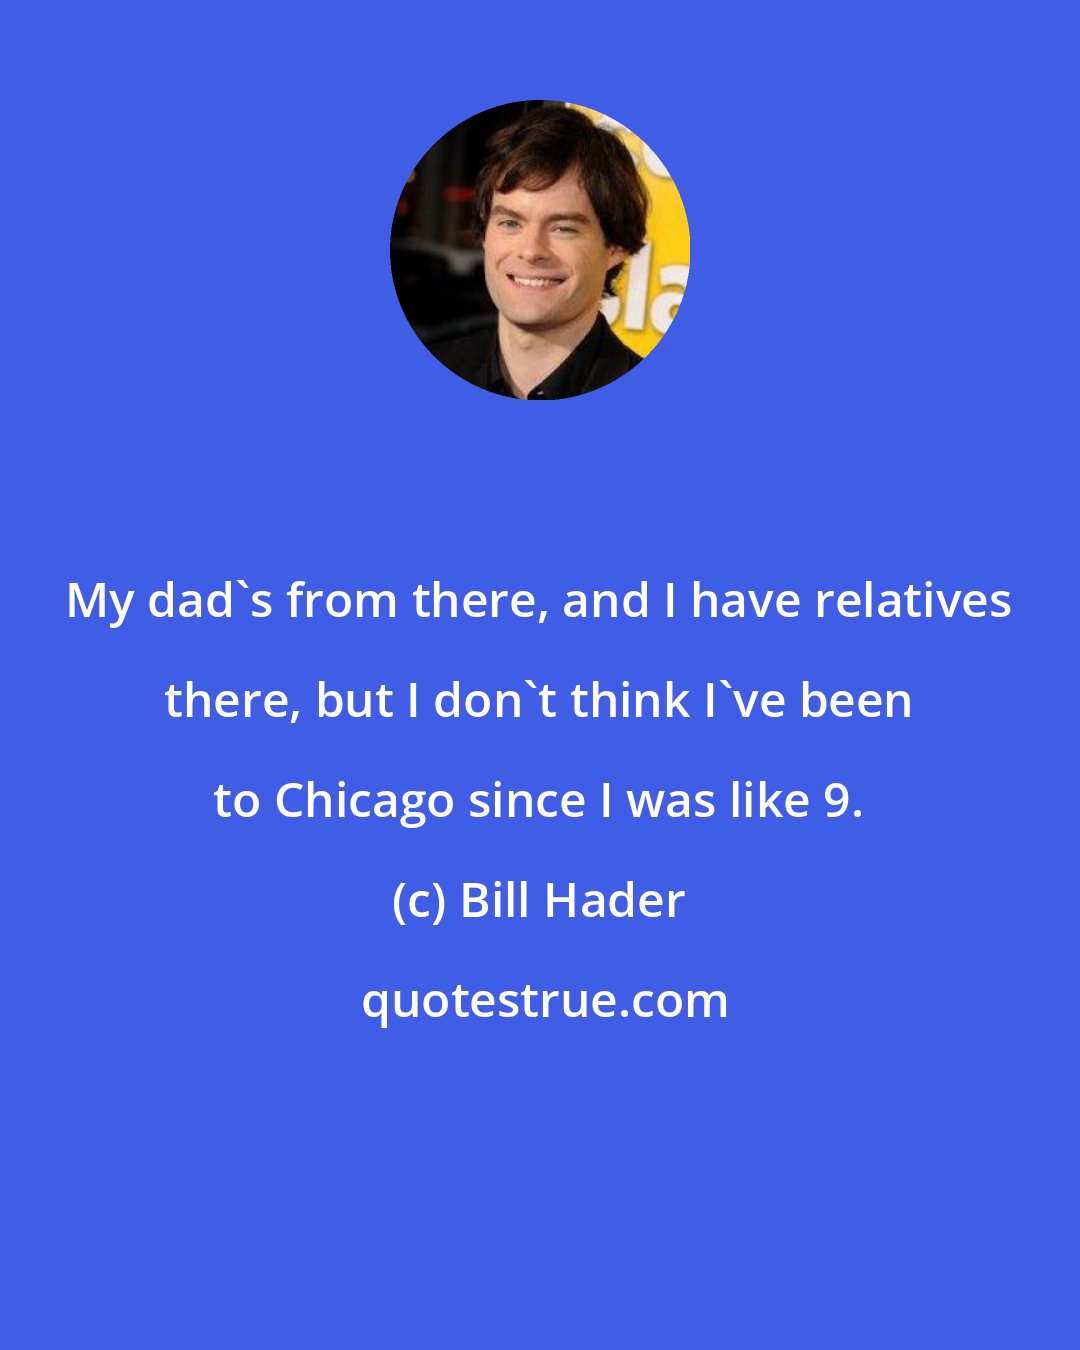 Bill Hader: My dad's from there, and I have relatives there, but I don't think I've been to Chicago since I was like 9.